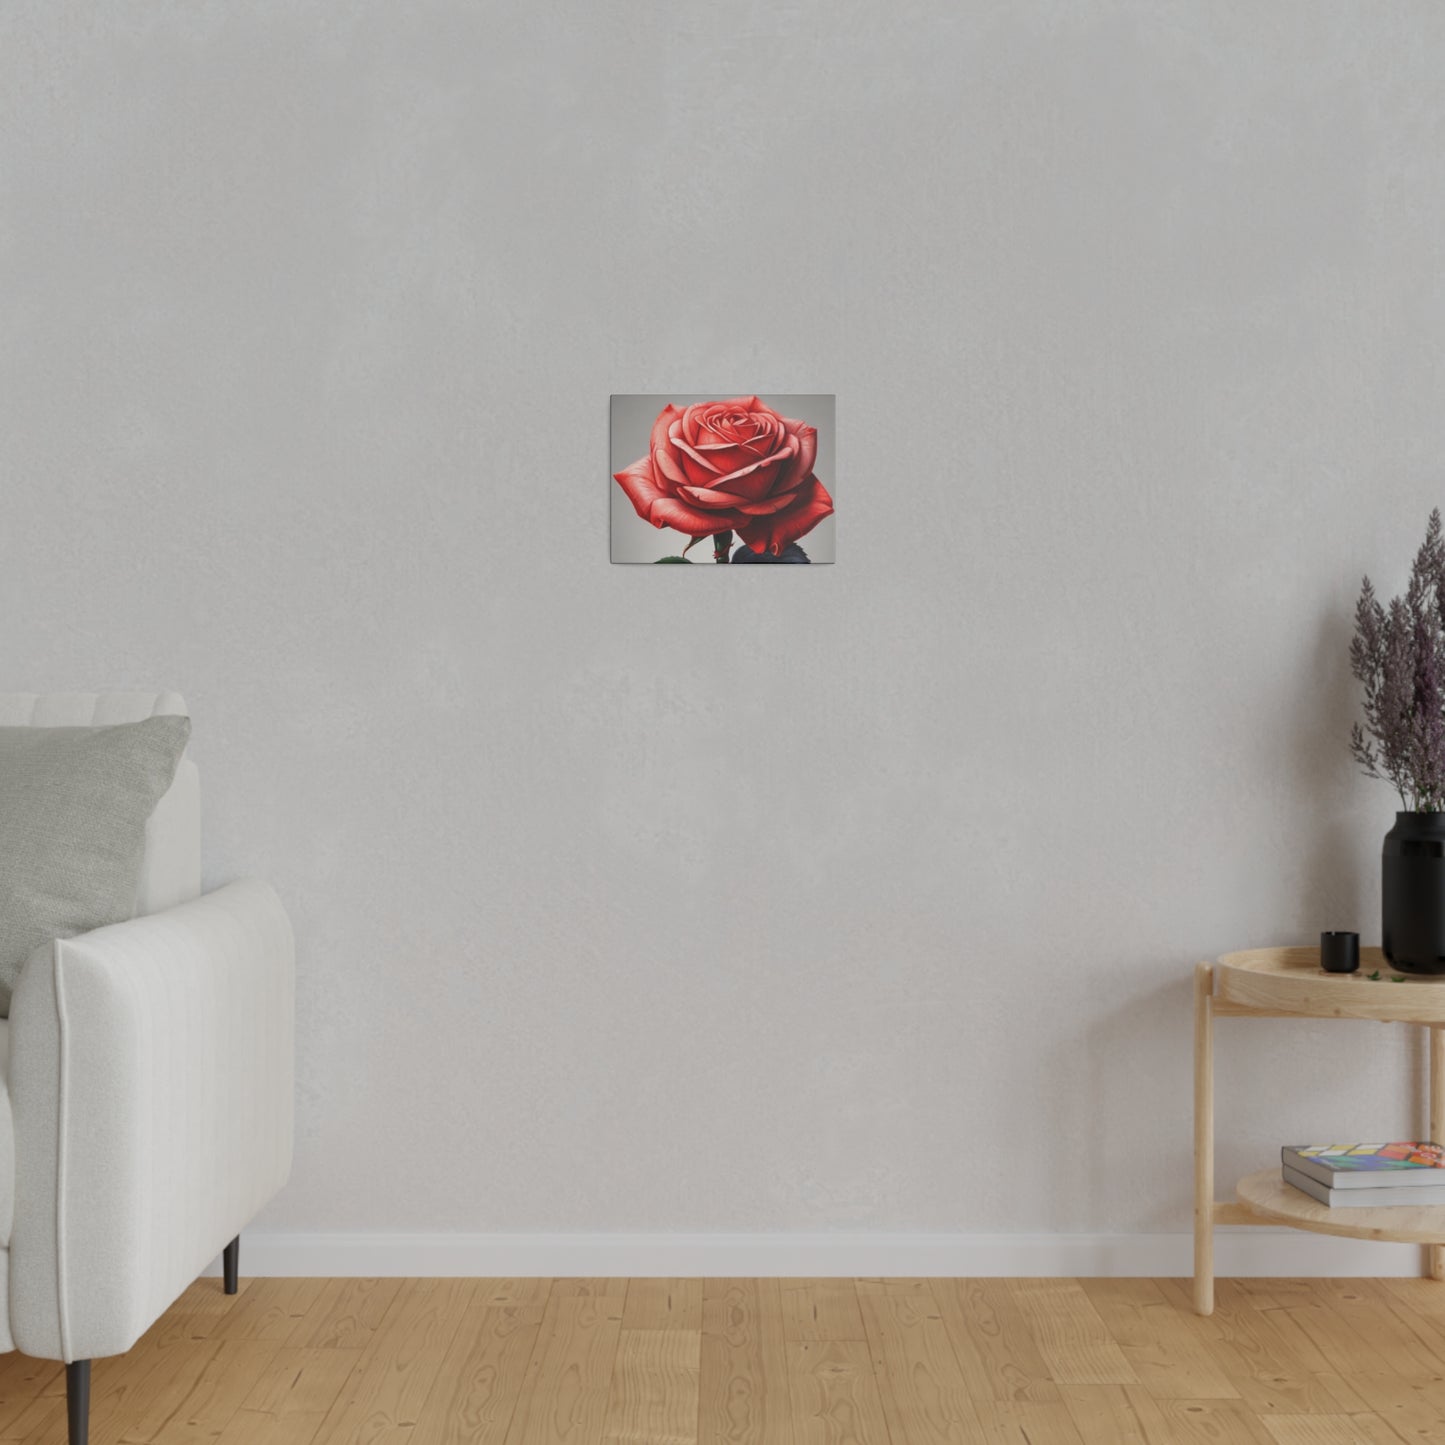 Large Red Rose - Matte Canvas, Stretched, 0.75"